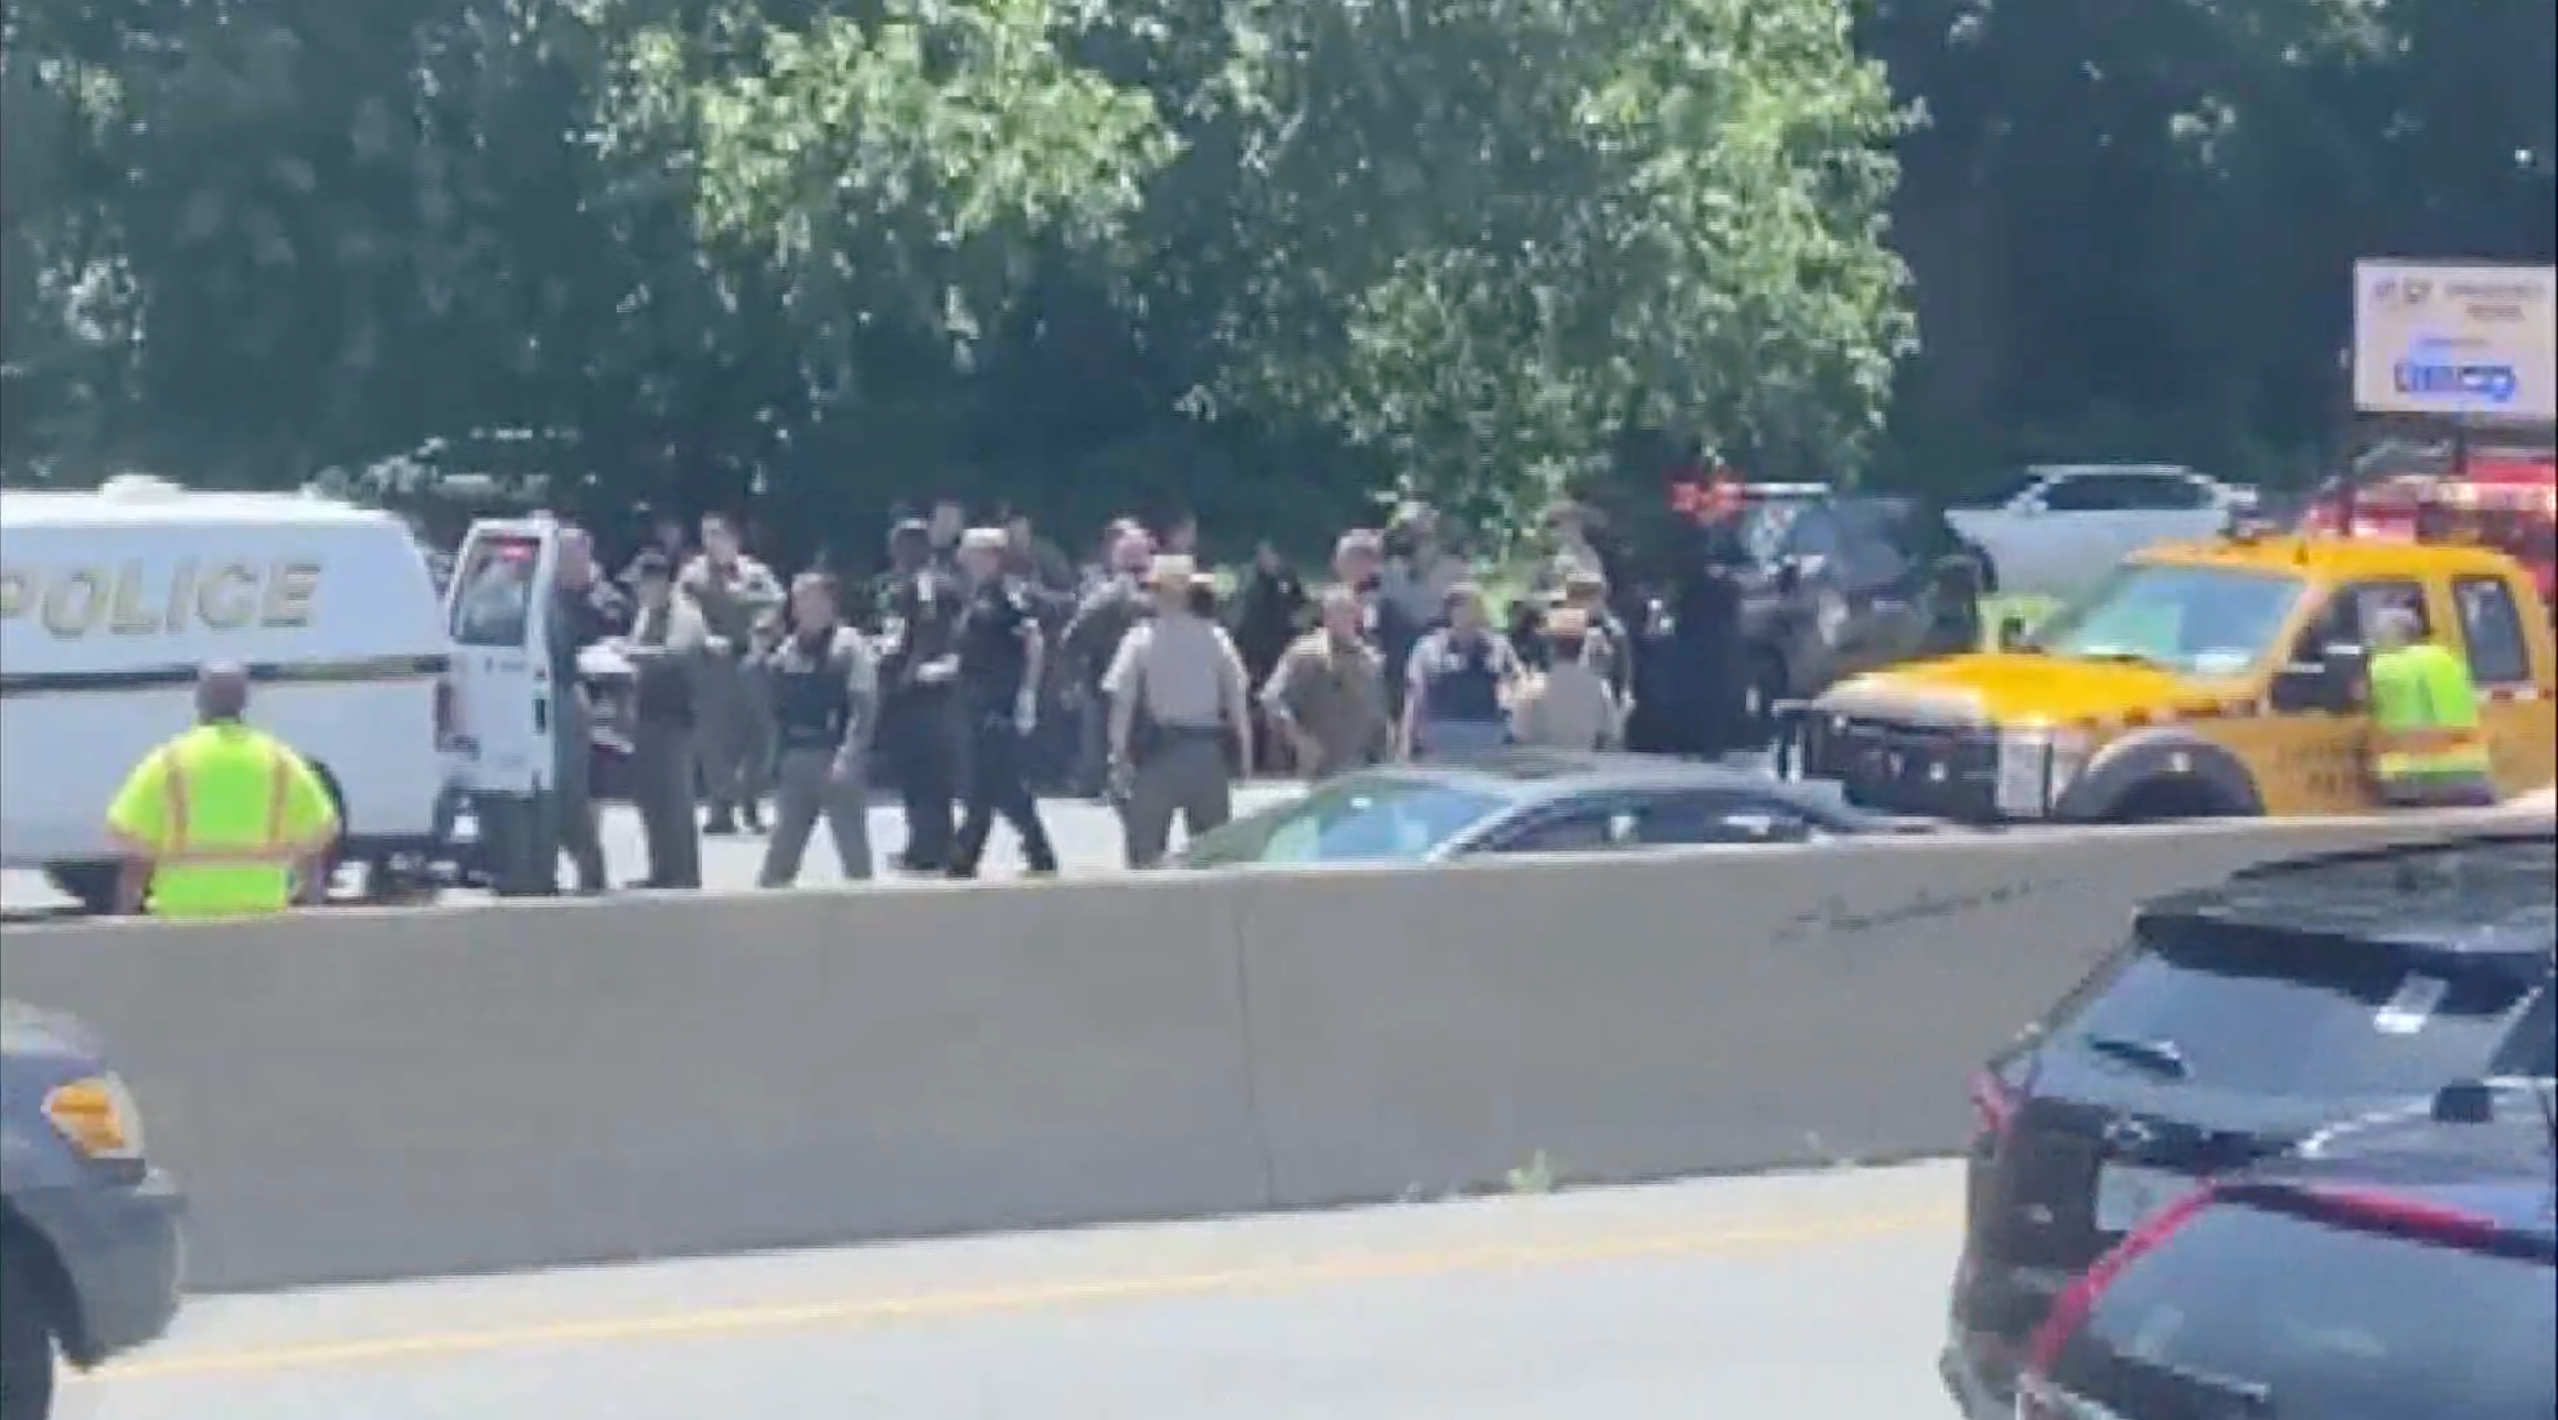 Climate protestors shut down part of I-495 in Maryland on Monday